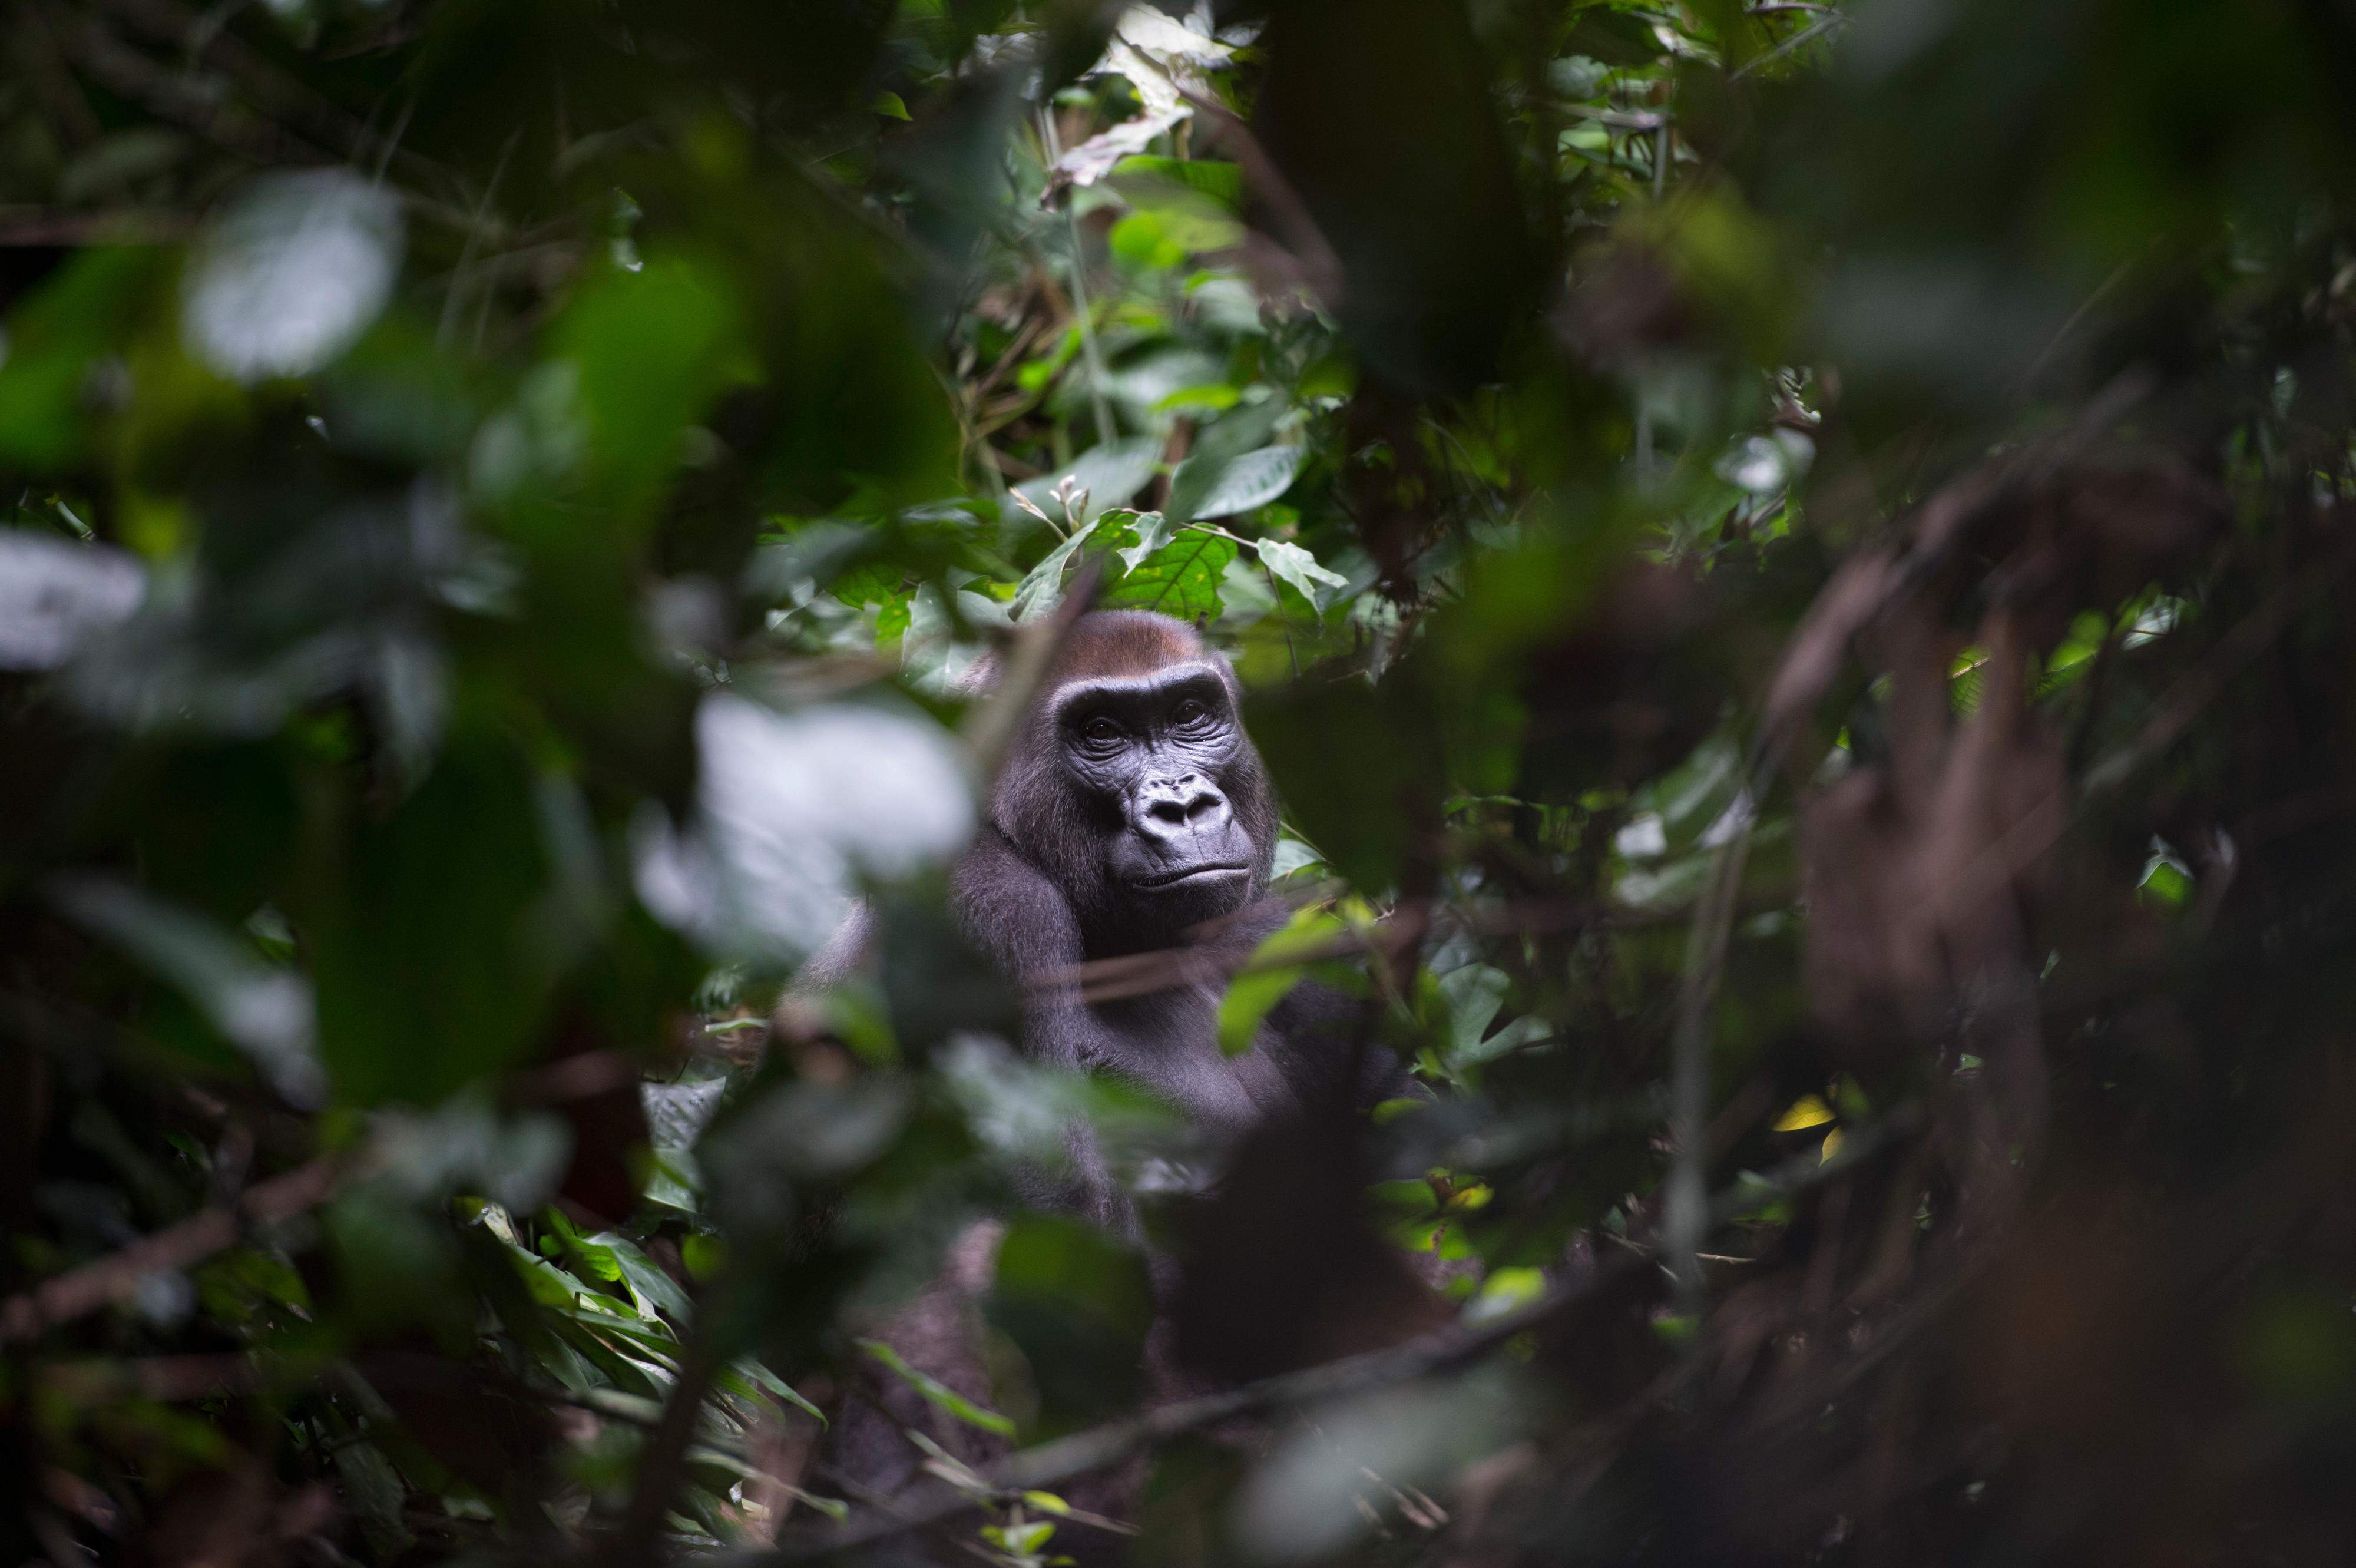 A Western Lowland Gorilla in Dzanga National Park in the tri-border region of Congo, Cameroon and Central African Republic.